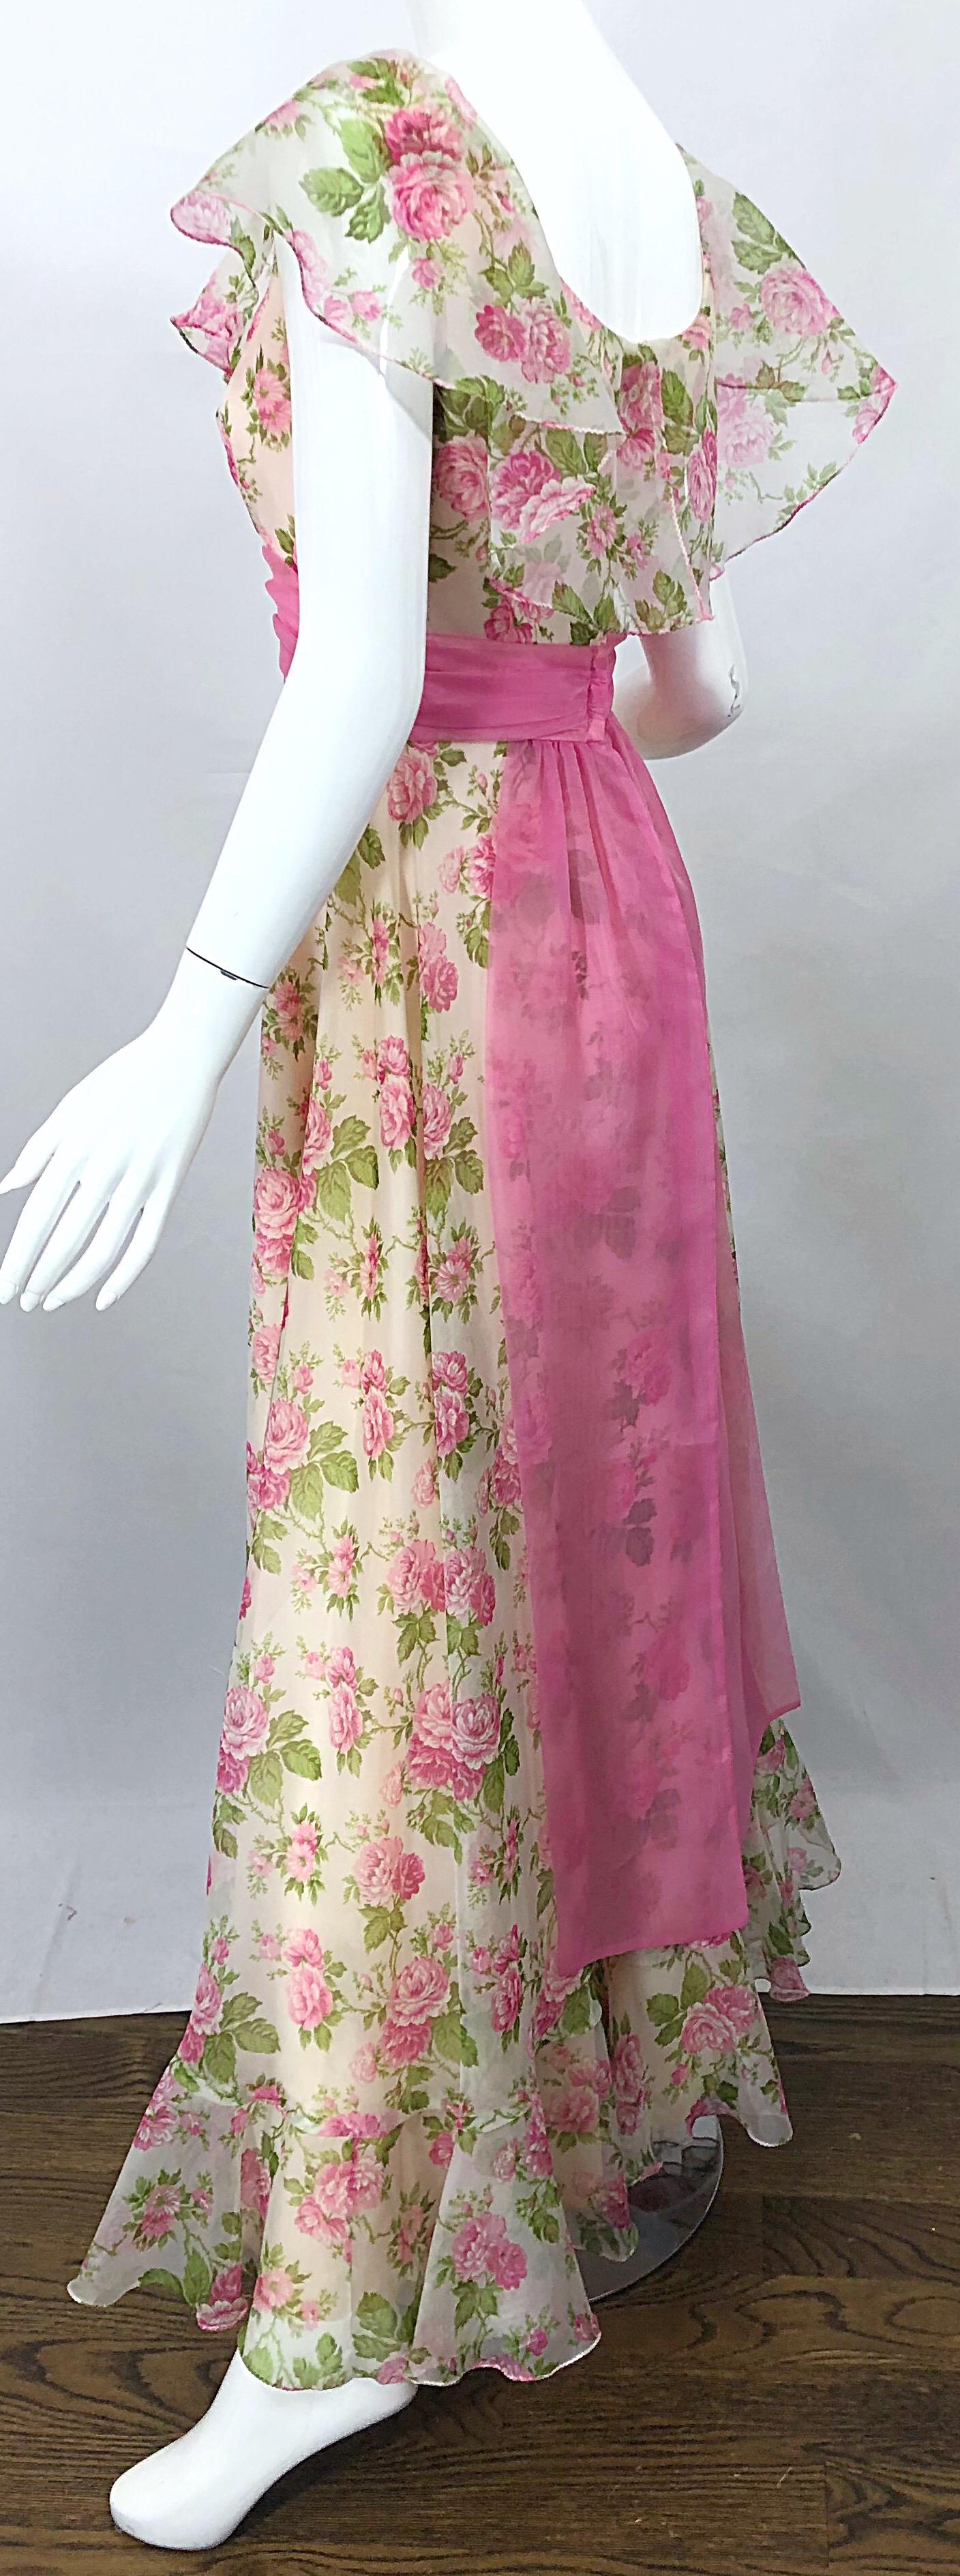 White Sylvia Ann 1970s Rose Print Pink Ivory Chiffon Vintage 70s Maxi Dress Gown For Sale